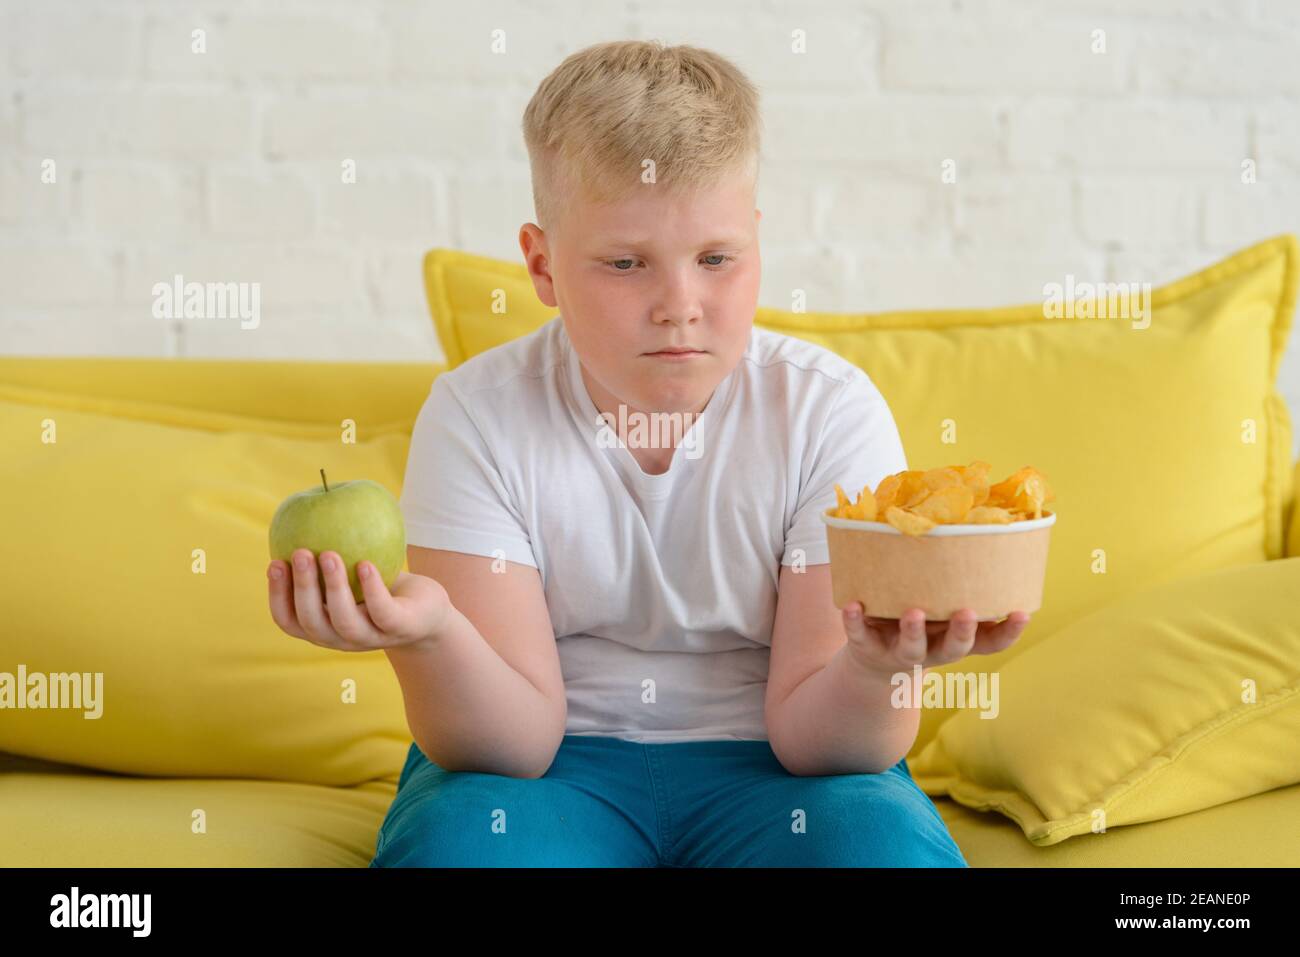 Obese boy choosing between foods. Apple or chips Stock Photo